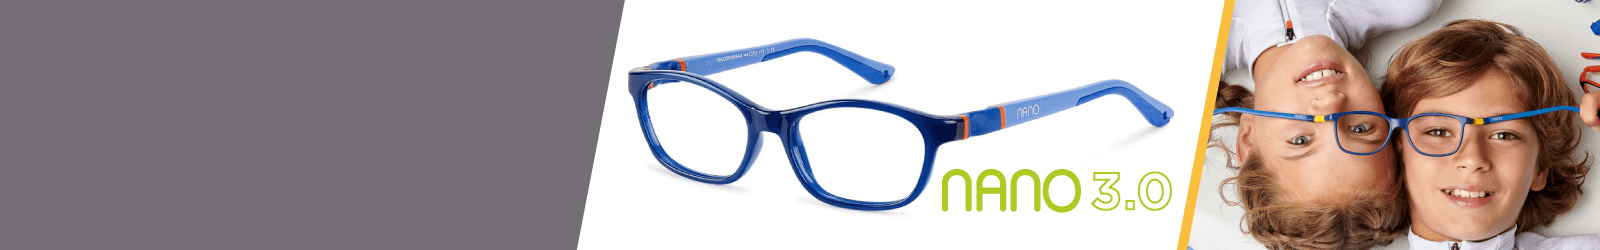 Prints Nano 3.0 Indestructible Kids Glasses from 6 to 8-year-old